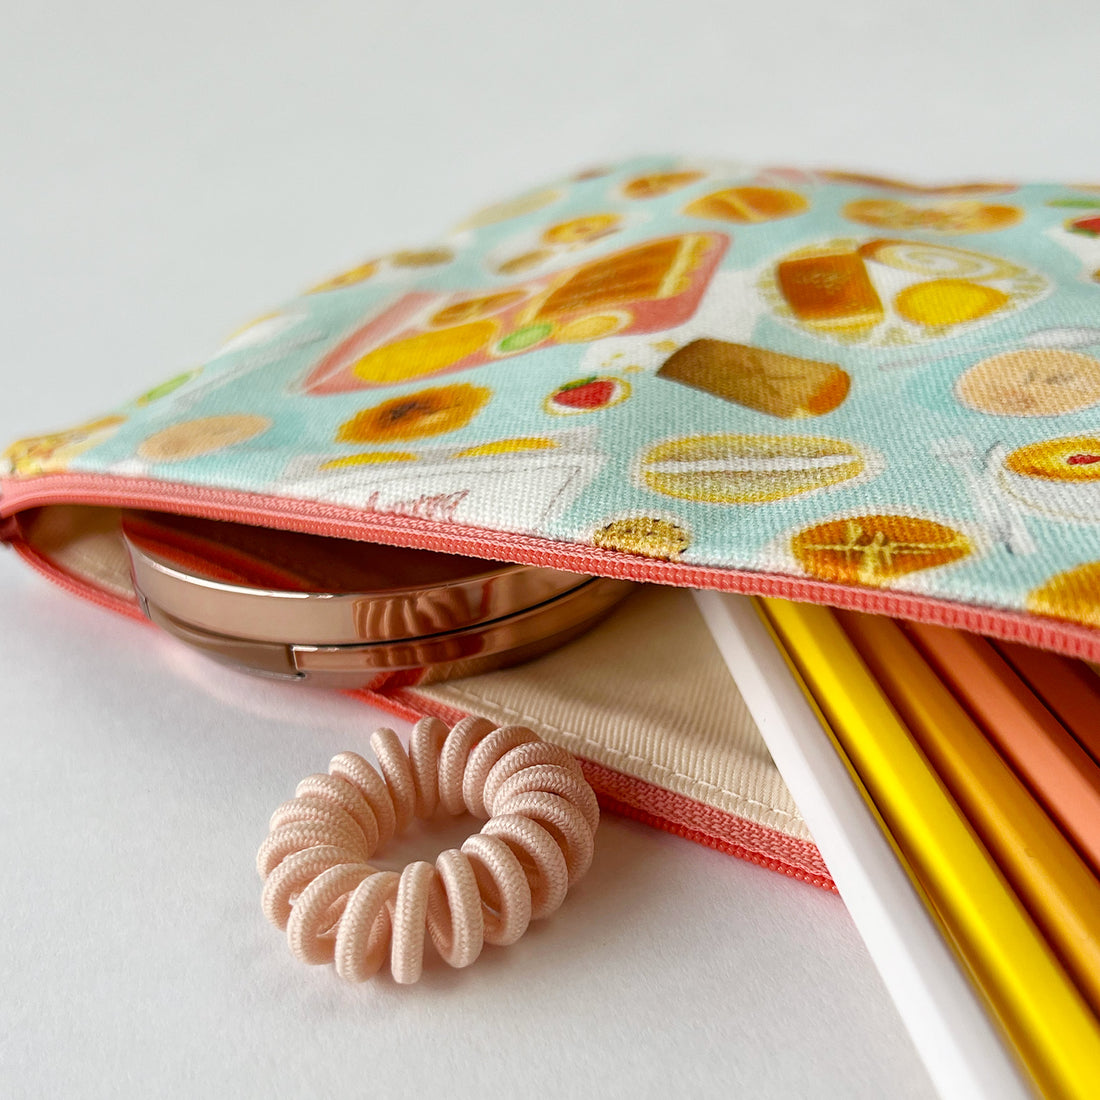 Chinese bakery zipper pouch by I&